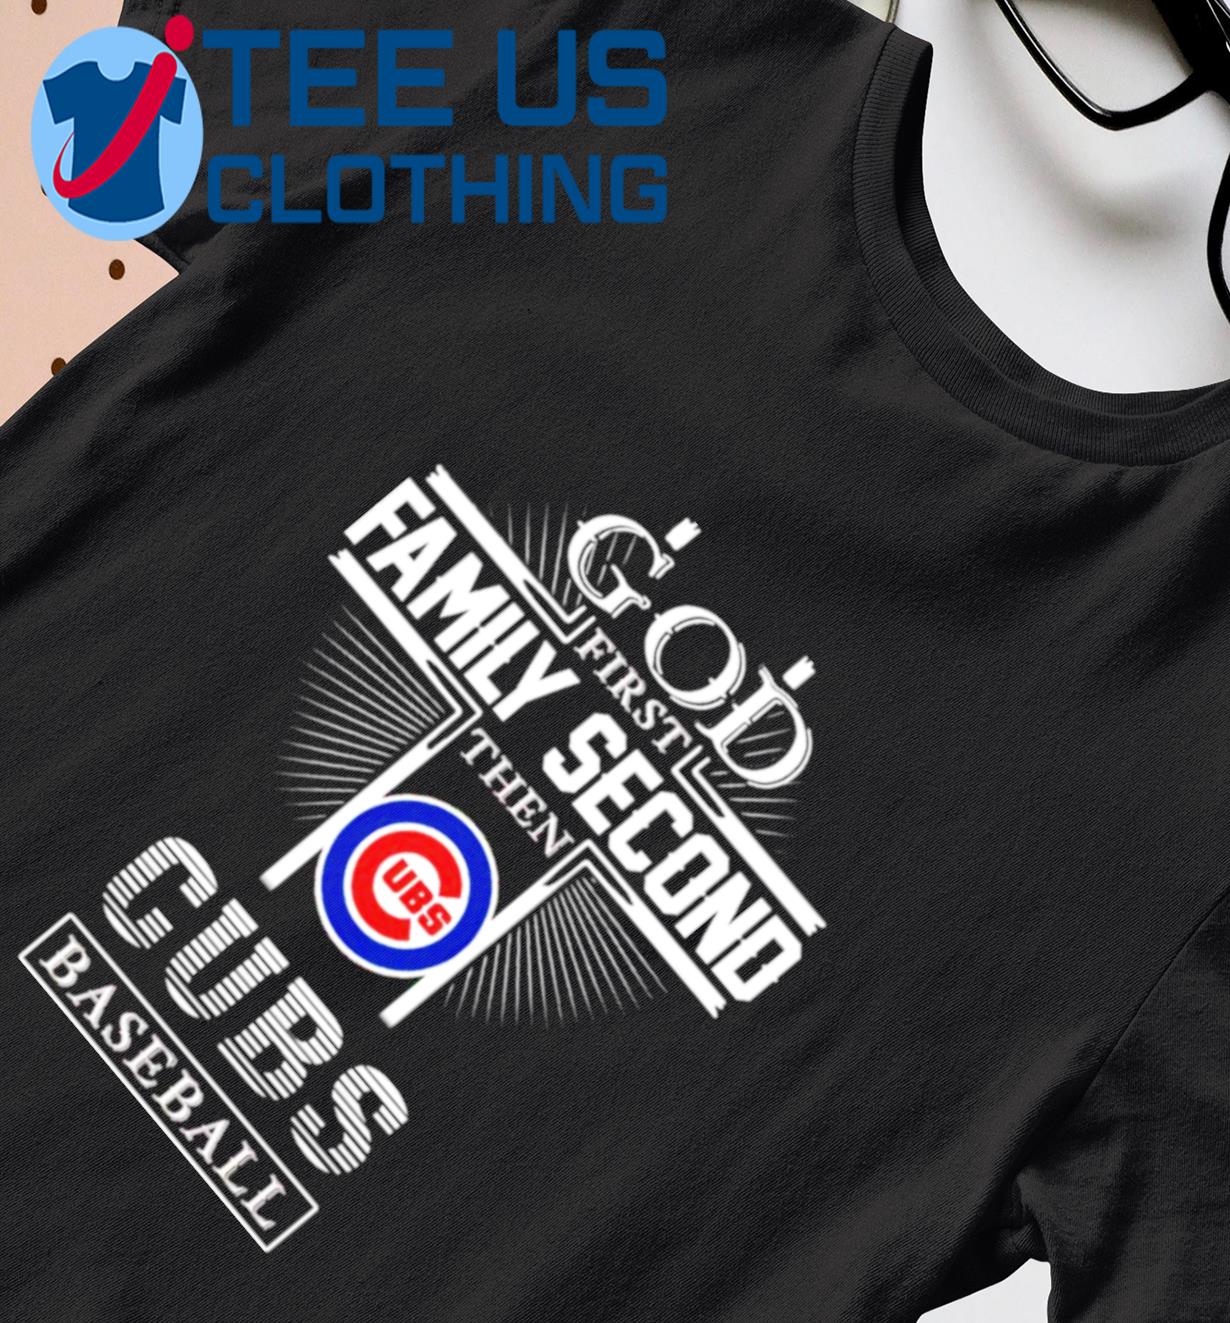 God First Family Second Then Chicago Cubs Baseball Shirt